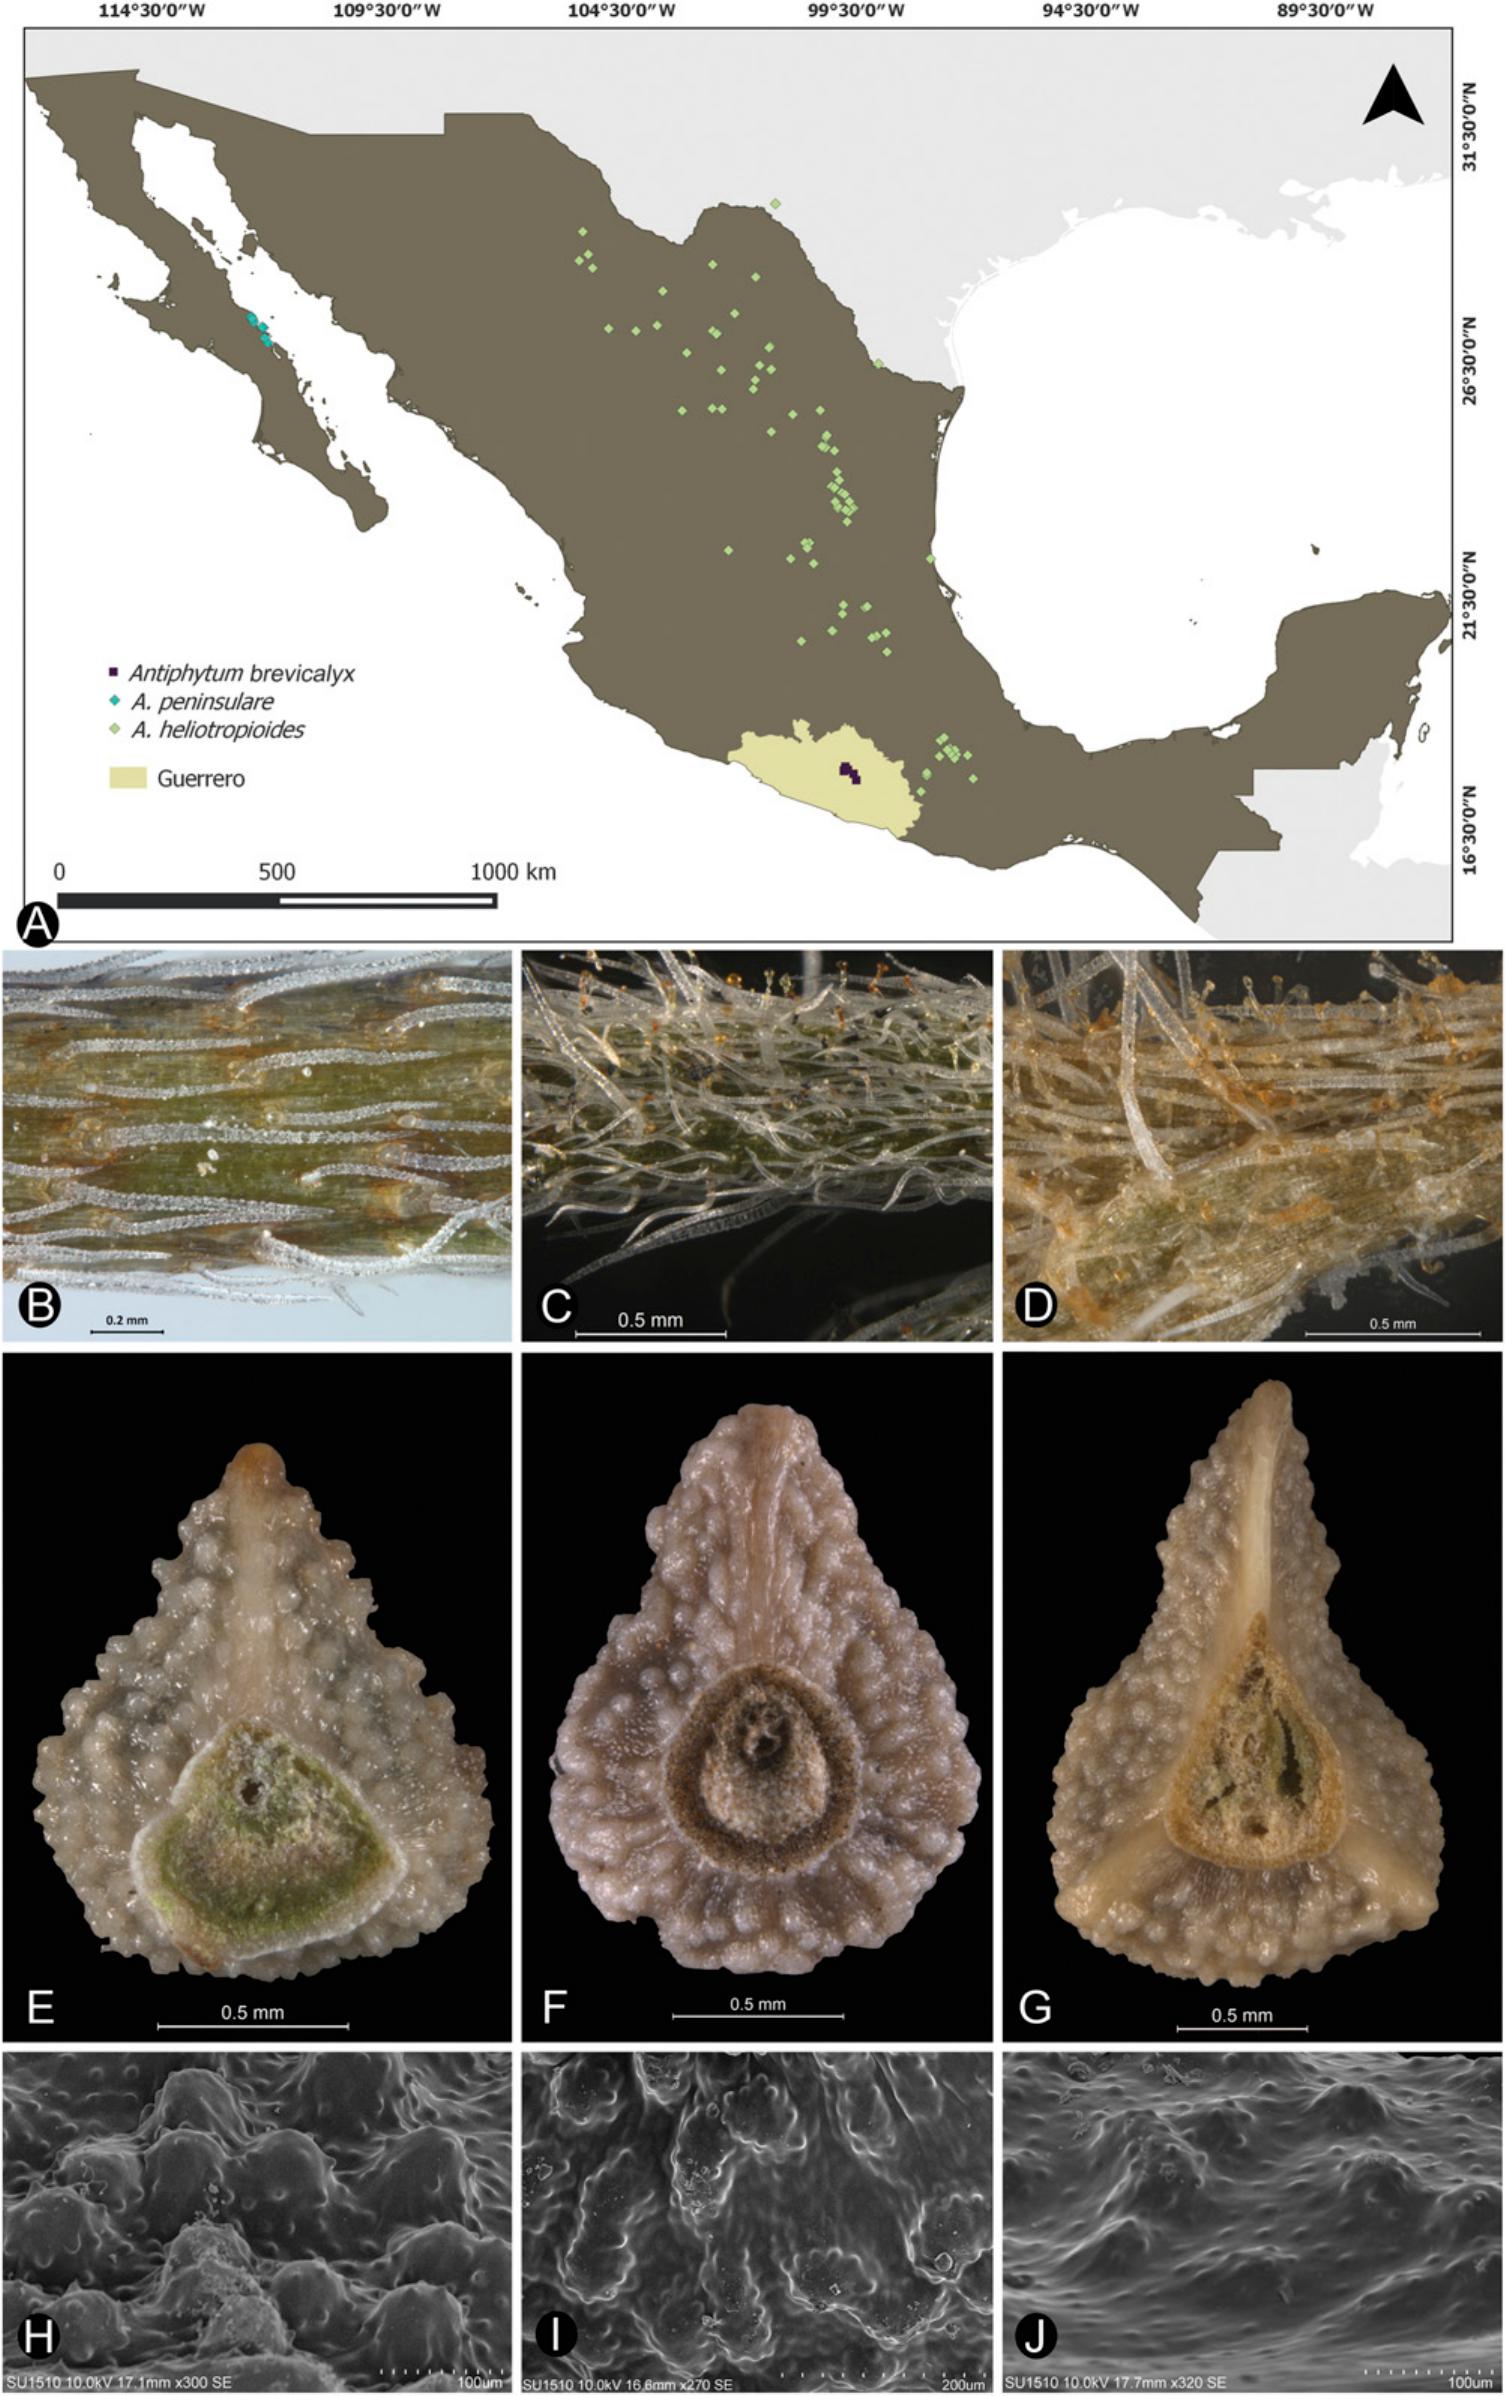 Molecular And Morphological Evidence Reveals A New Species Of Antiphytum Echiochiloideae Boraginaceae From Guerrero Mexico